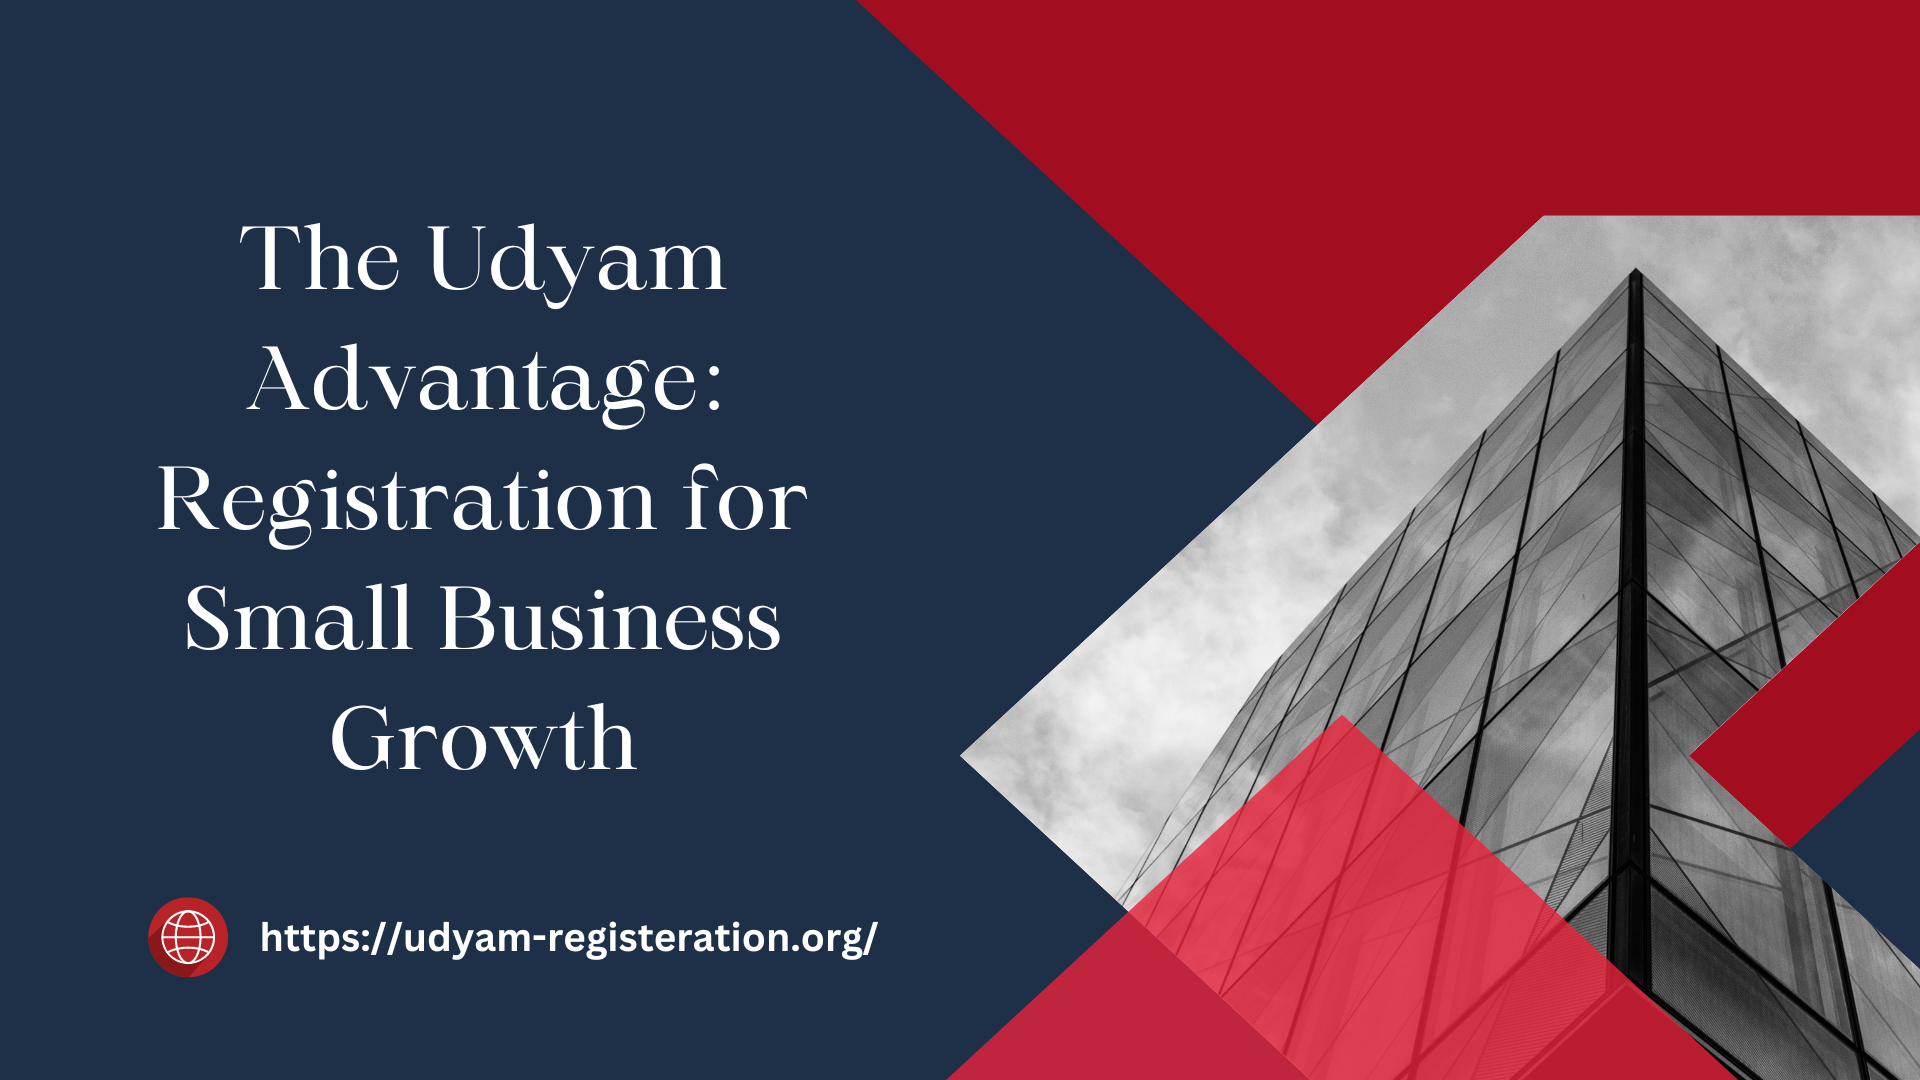 The Udyam Advantage: Registration for Small Business Growth